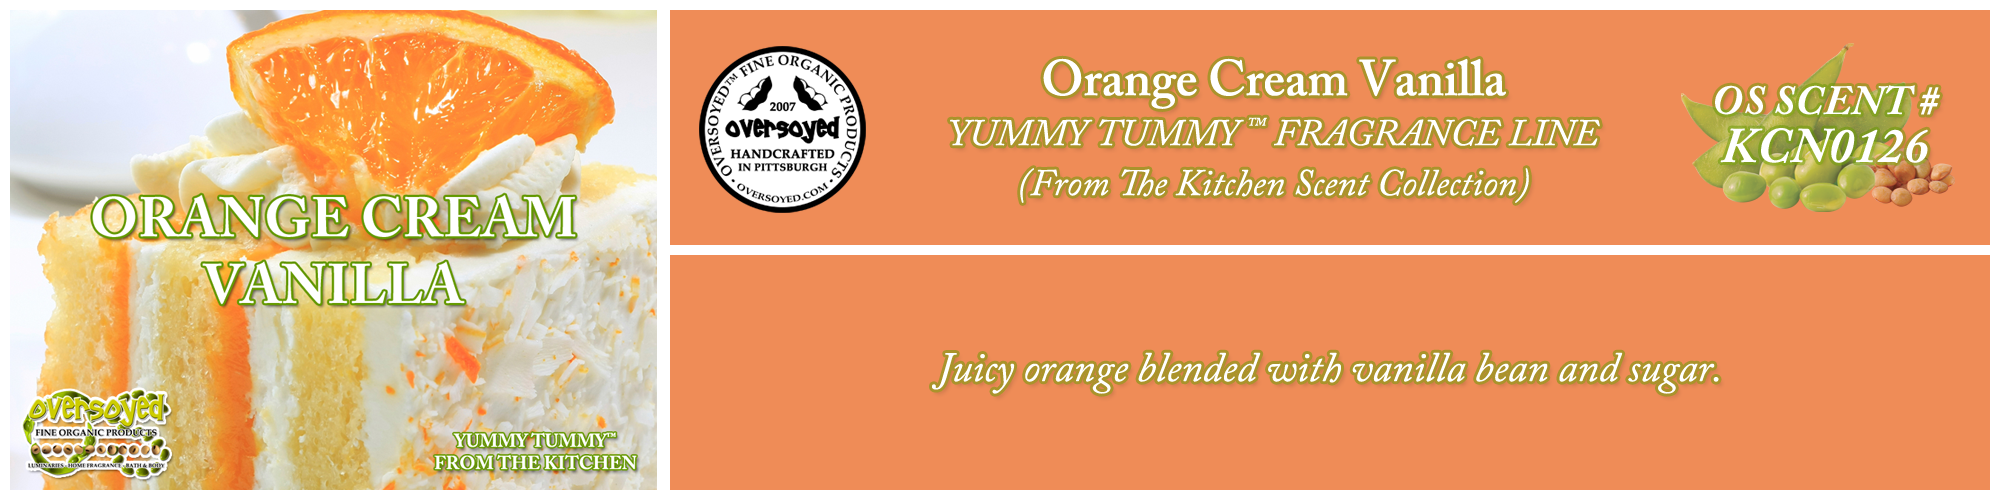 Orange Cream Vanilla Handcrafted Products Collection